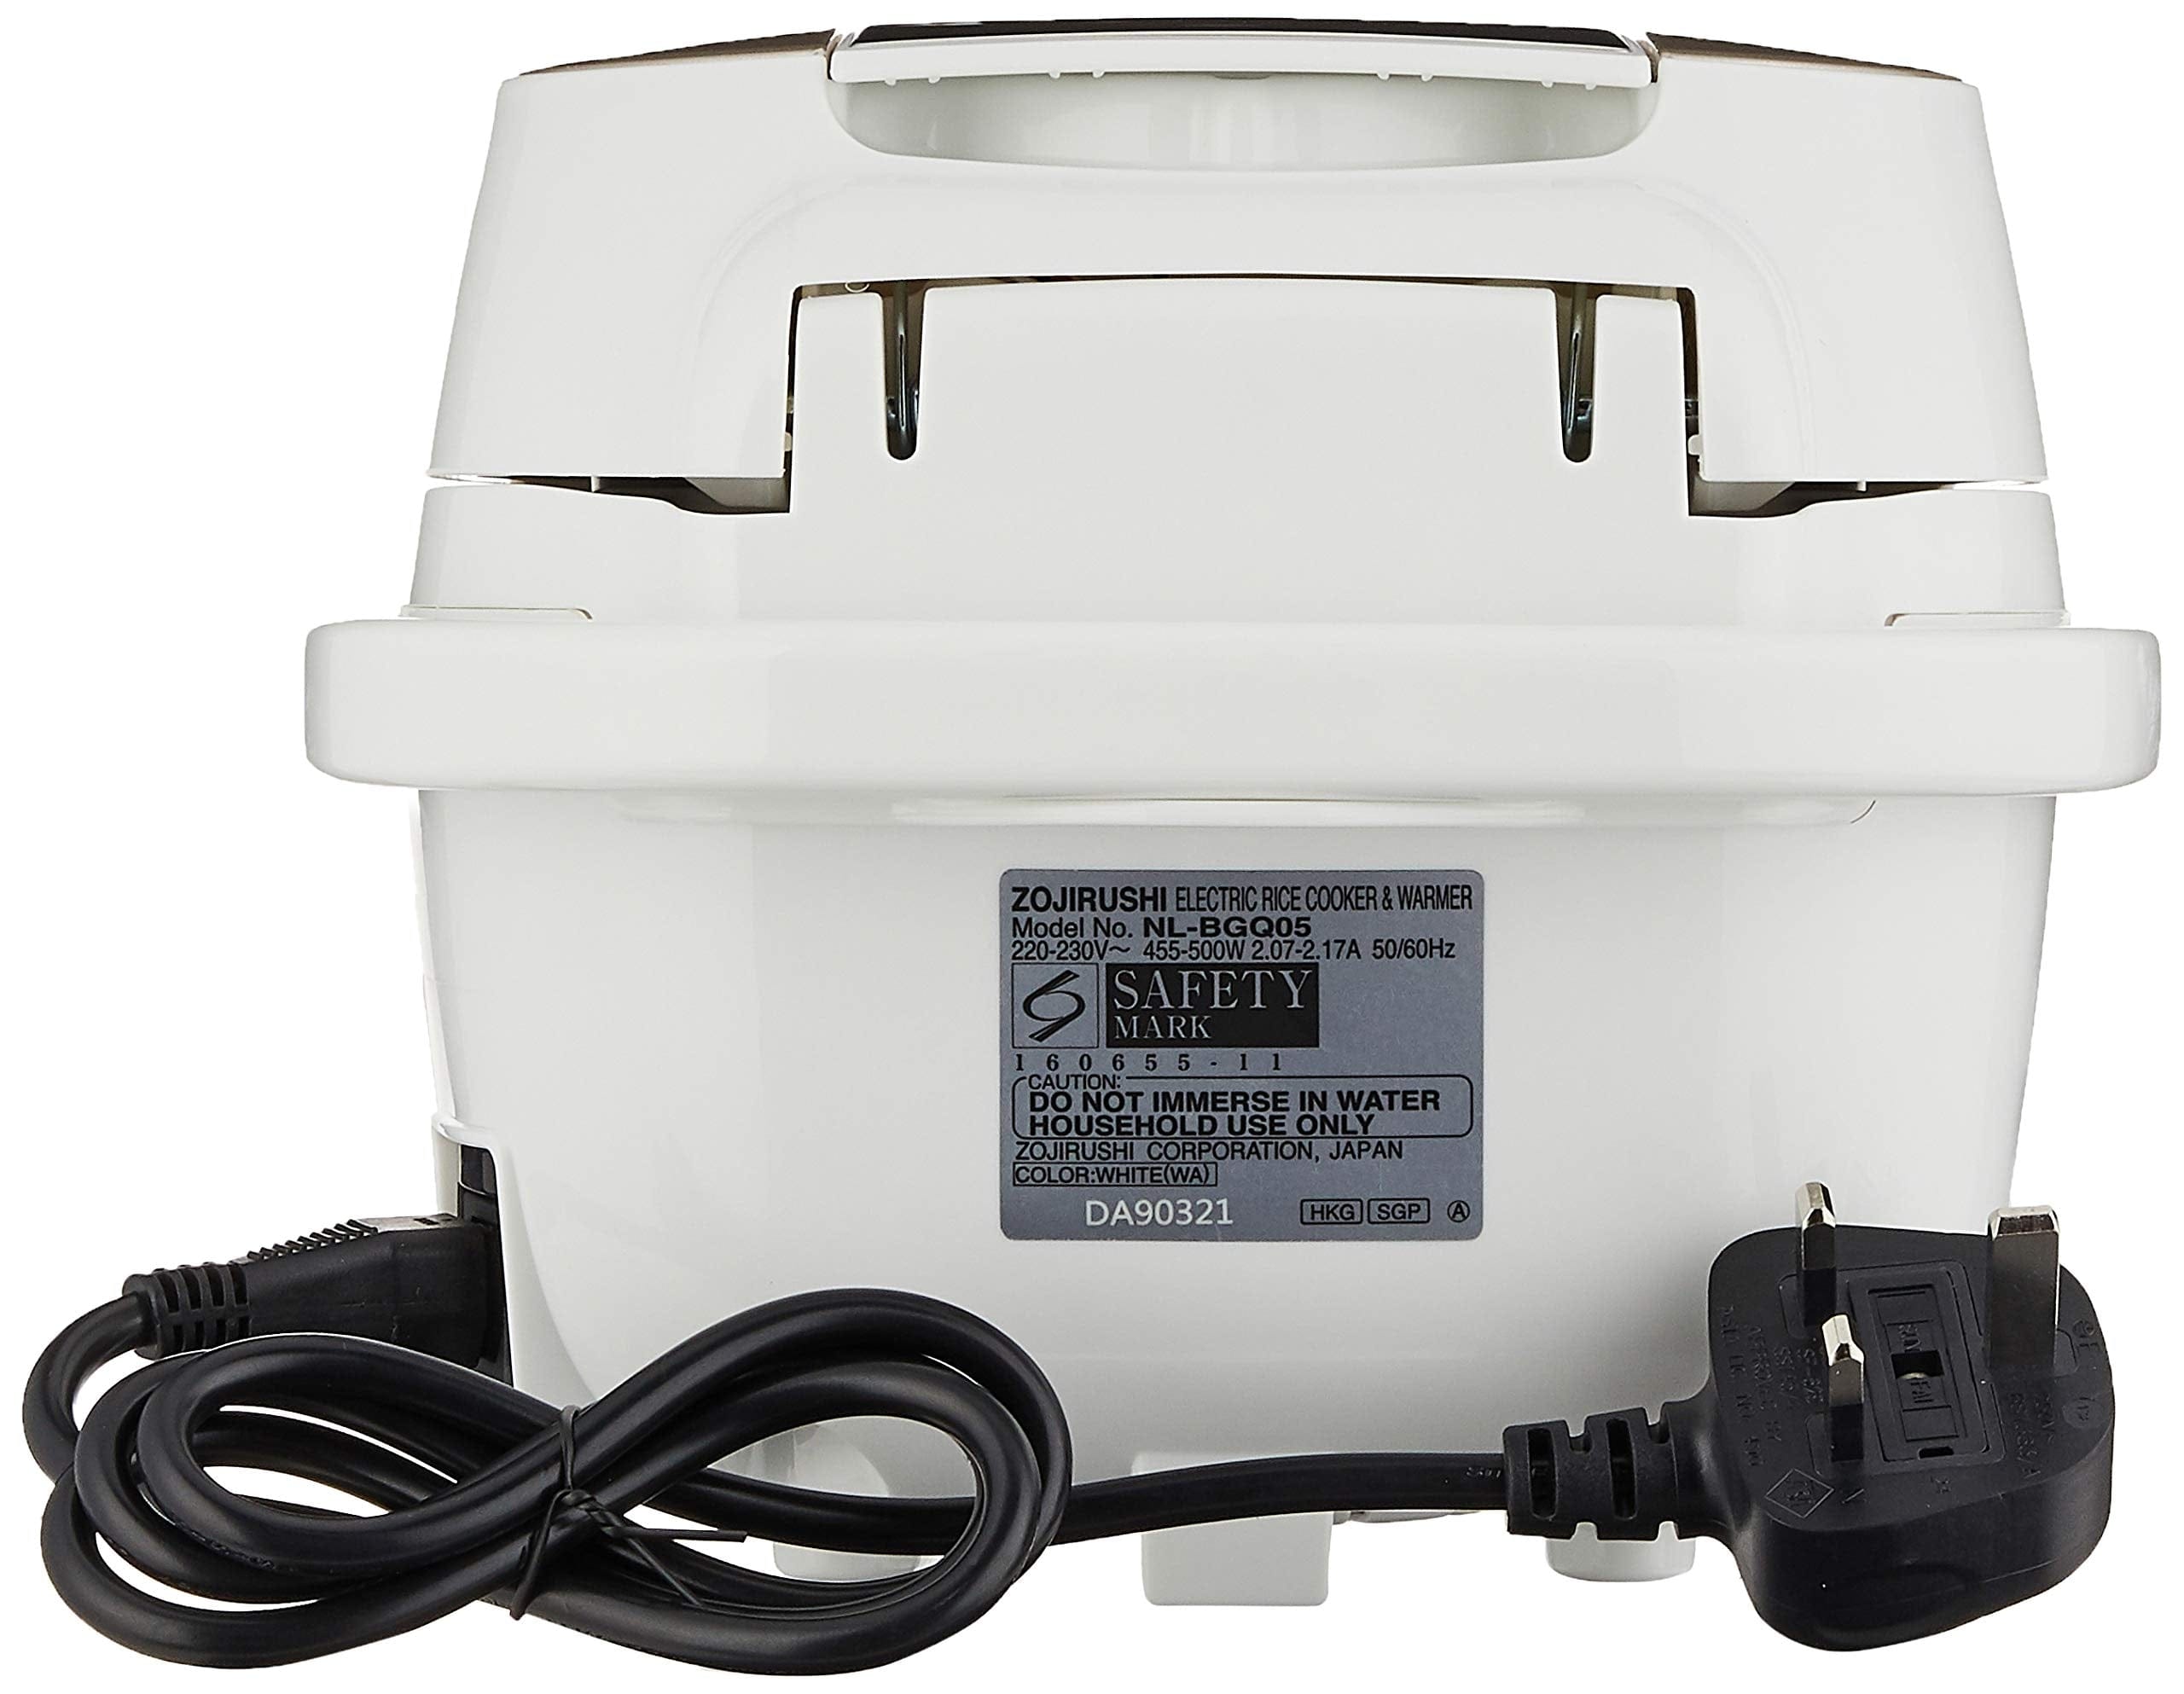 Electronic Rice Cooker And Warmer 0.5 Litre  Stainless